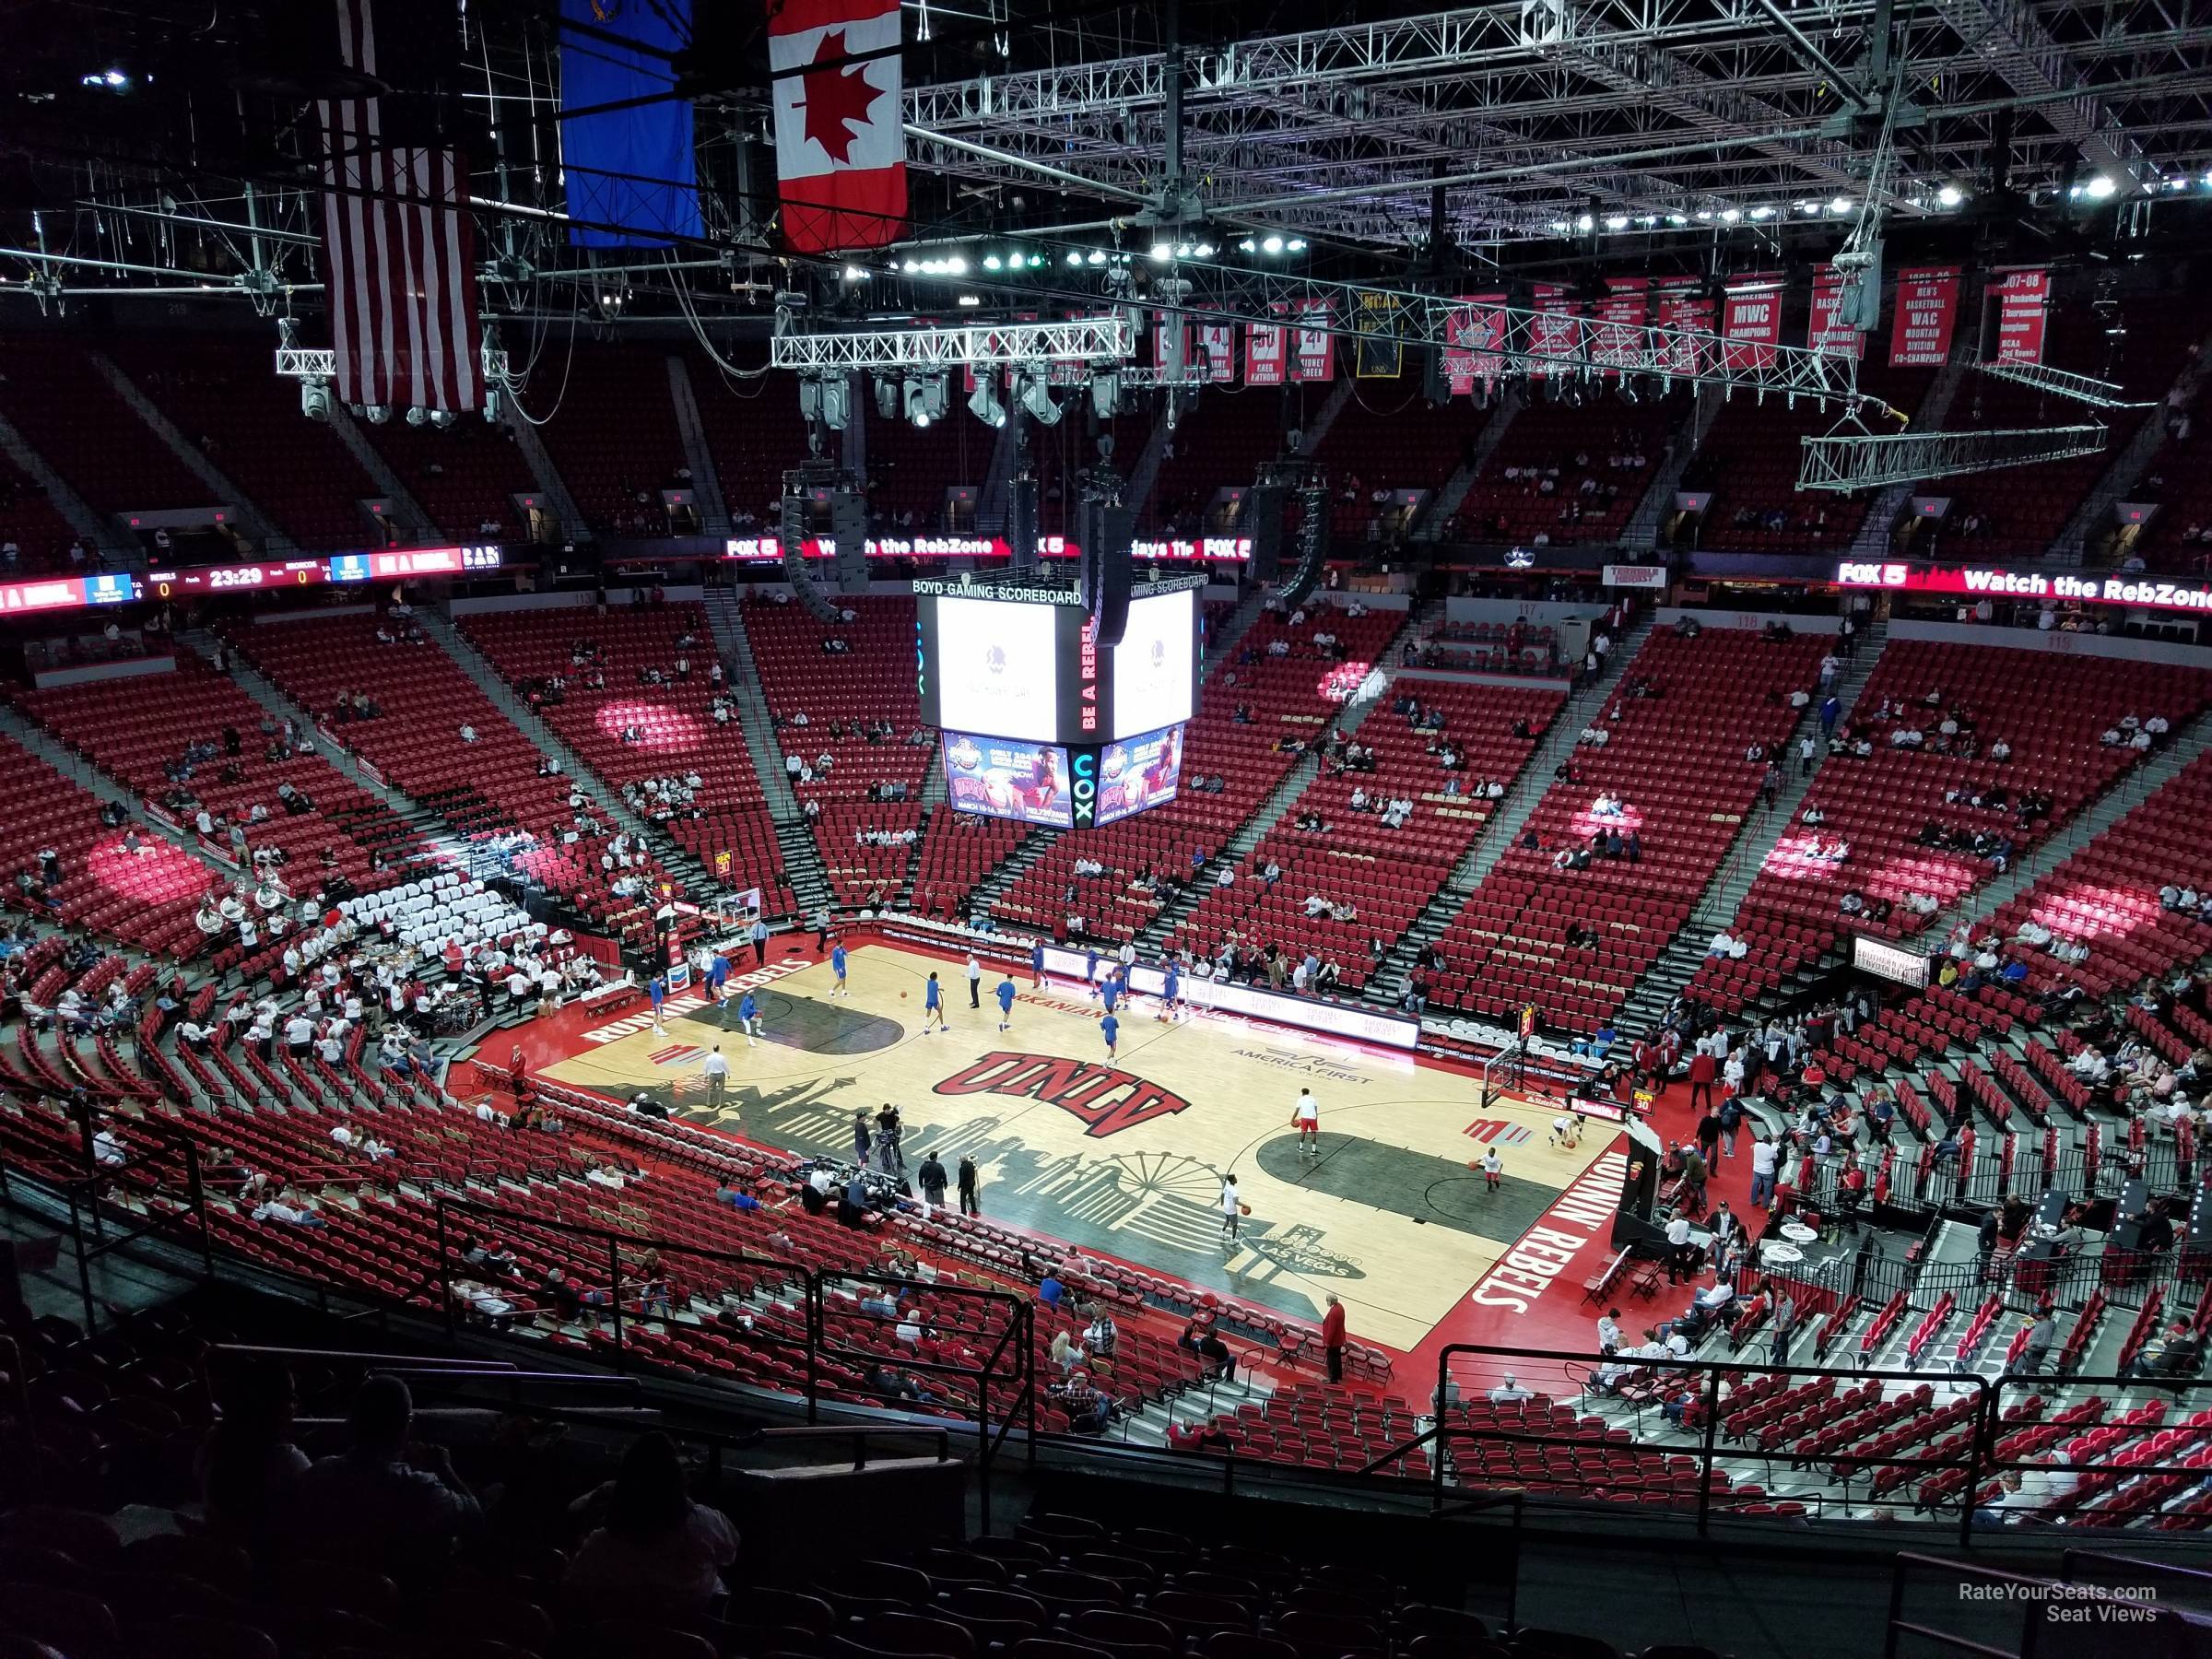 section 206, row l seat view  - thomas and mack center